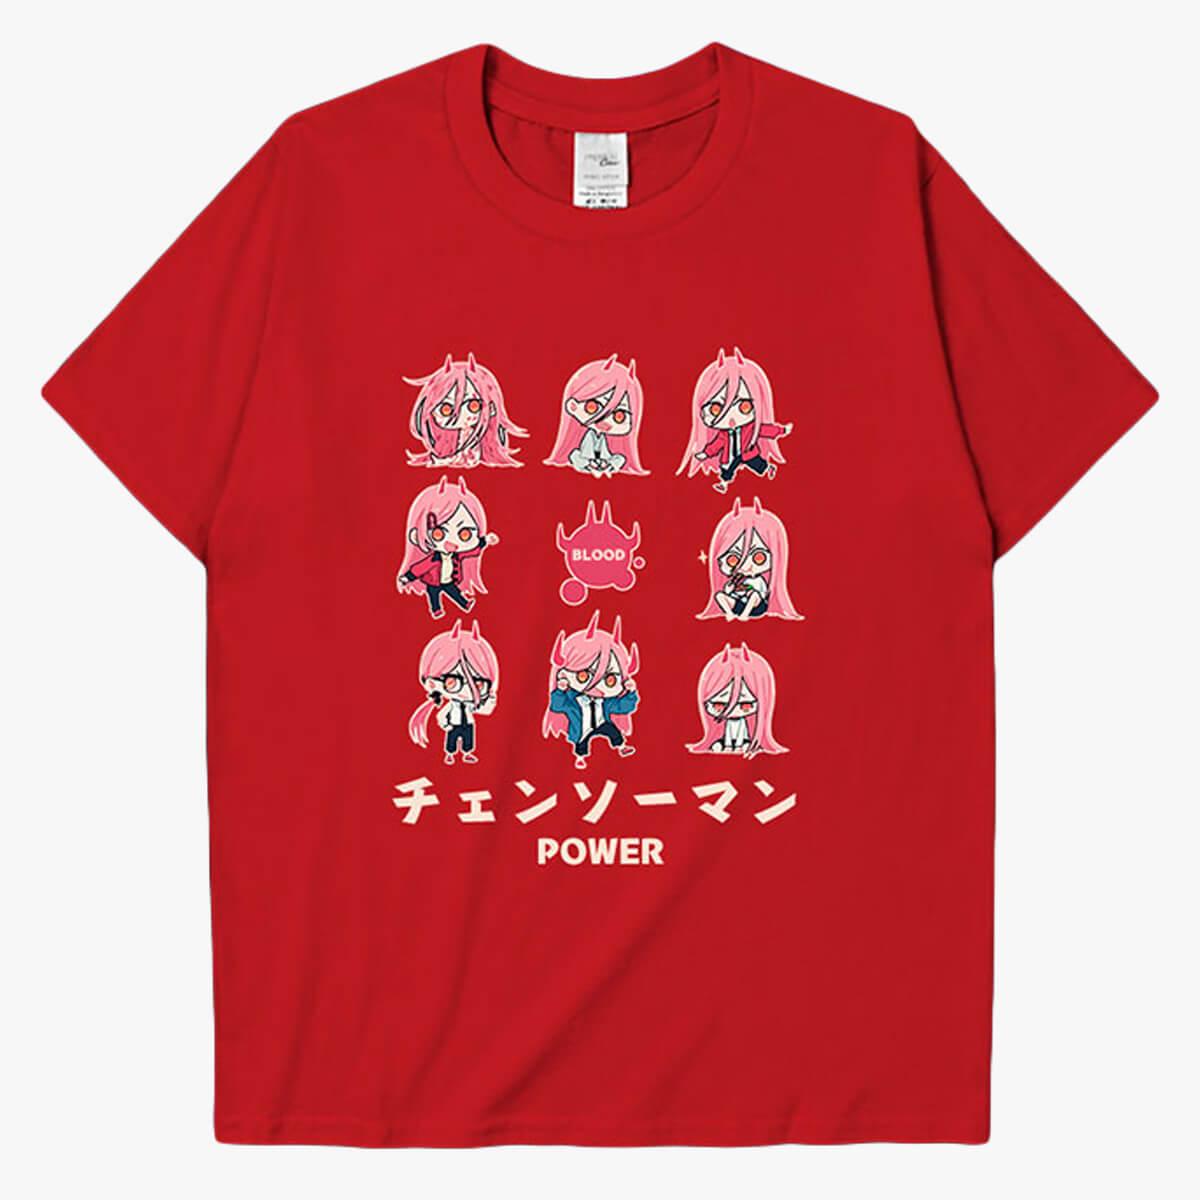 Chainsaw Man Power Chibi Aesthetic T-Shirt - Aesthetic Clothes Shop